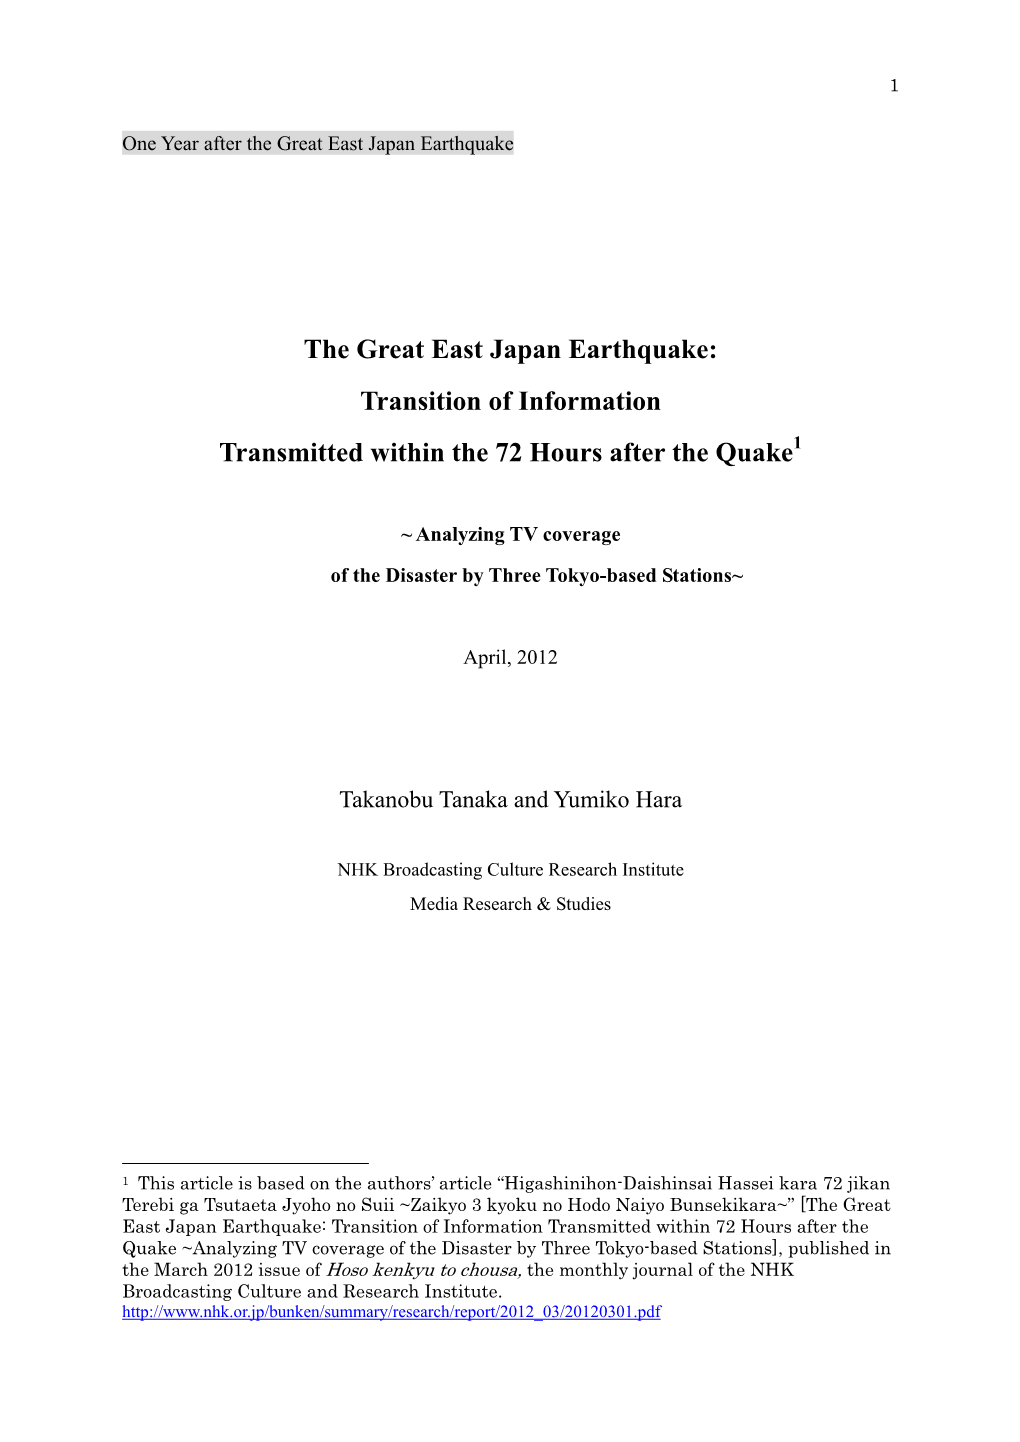 The Great East Japan Earthquake: Transition of Information Transmitted Within the 72 Hours After the Quake1